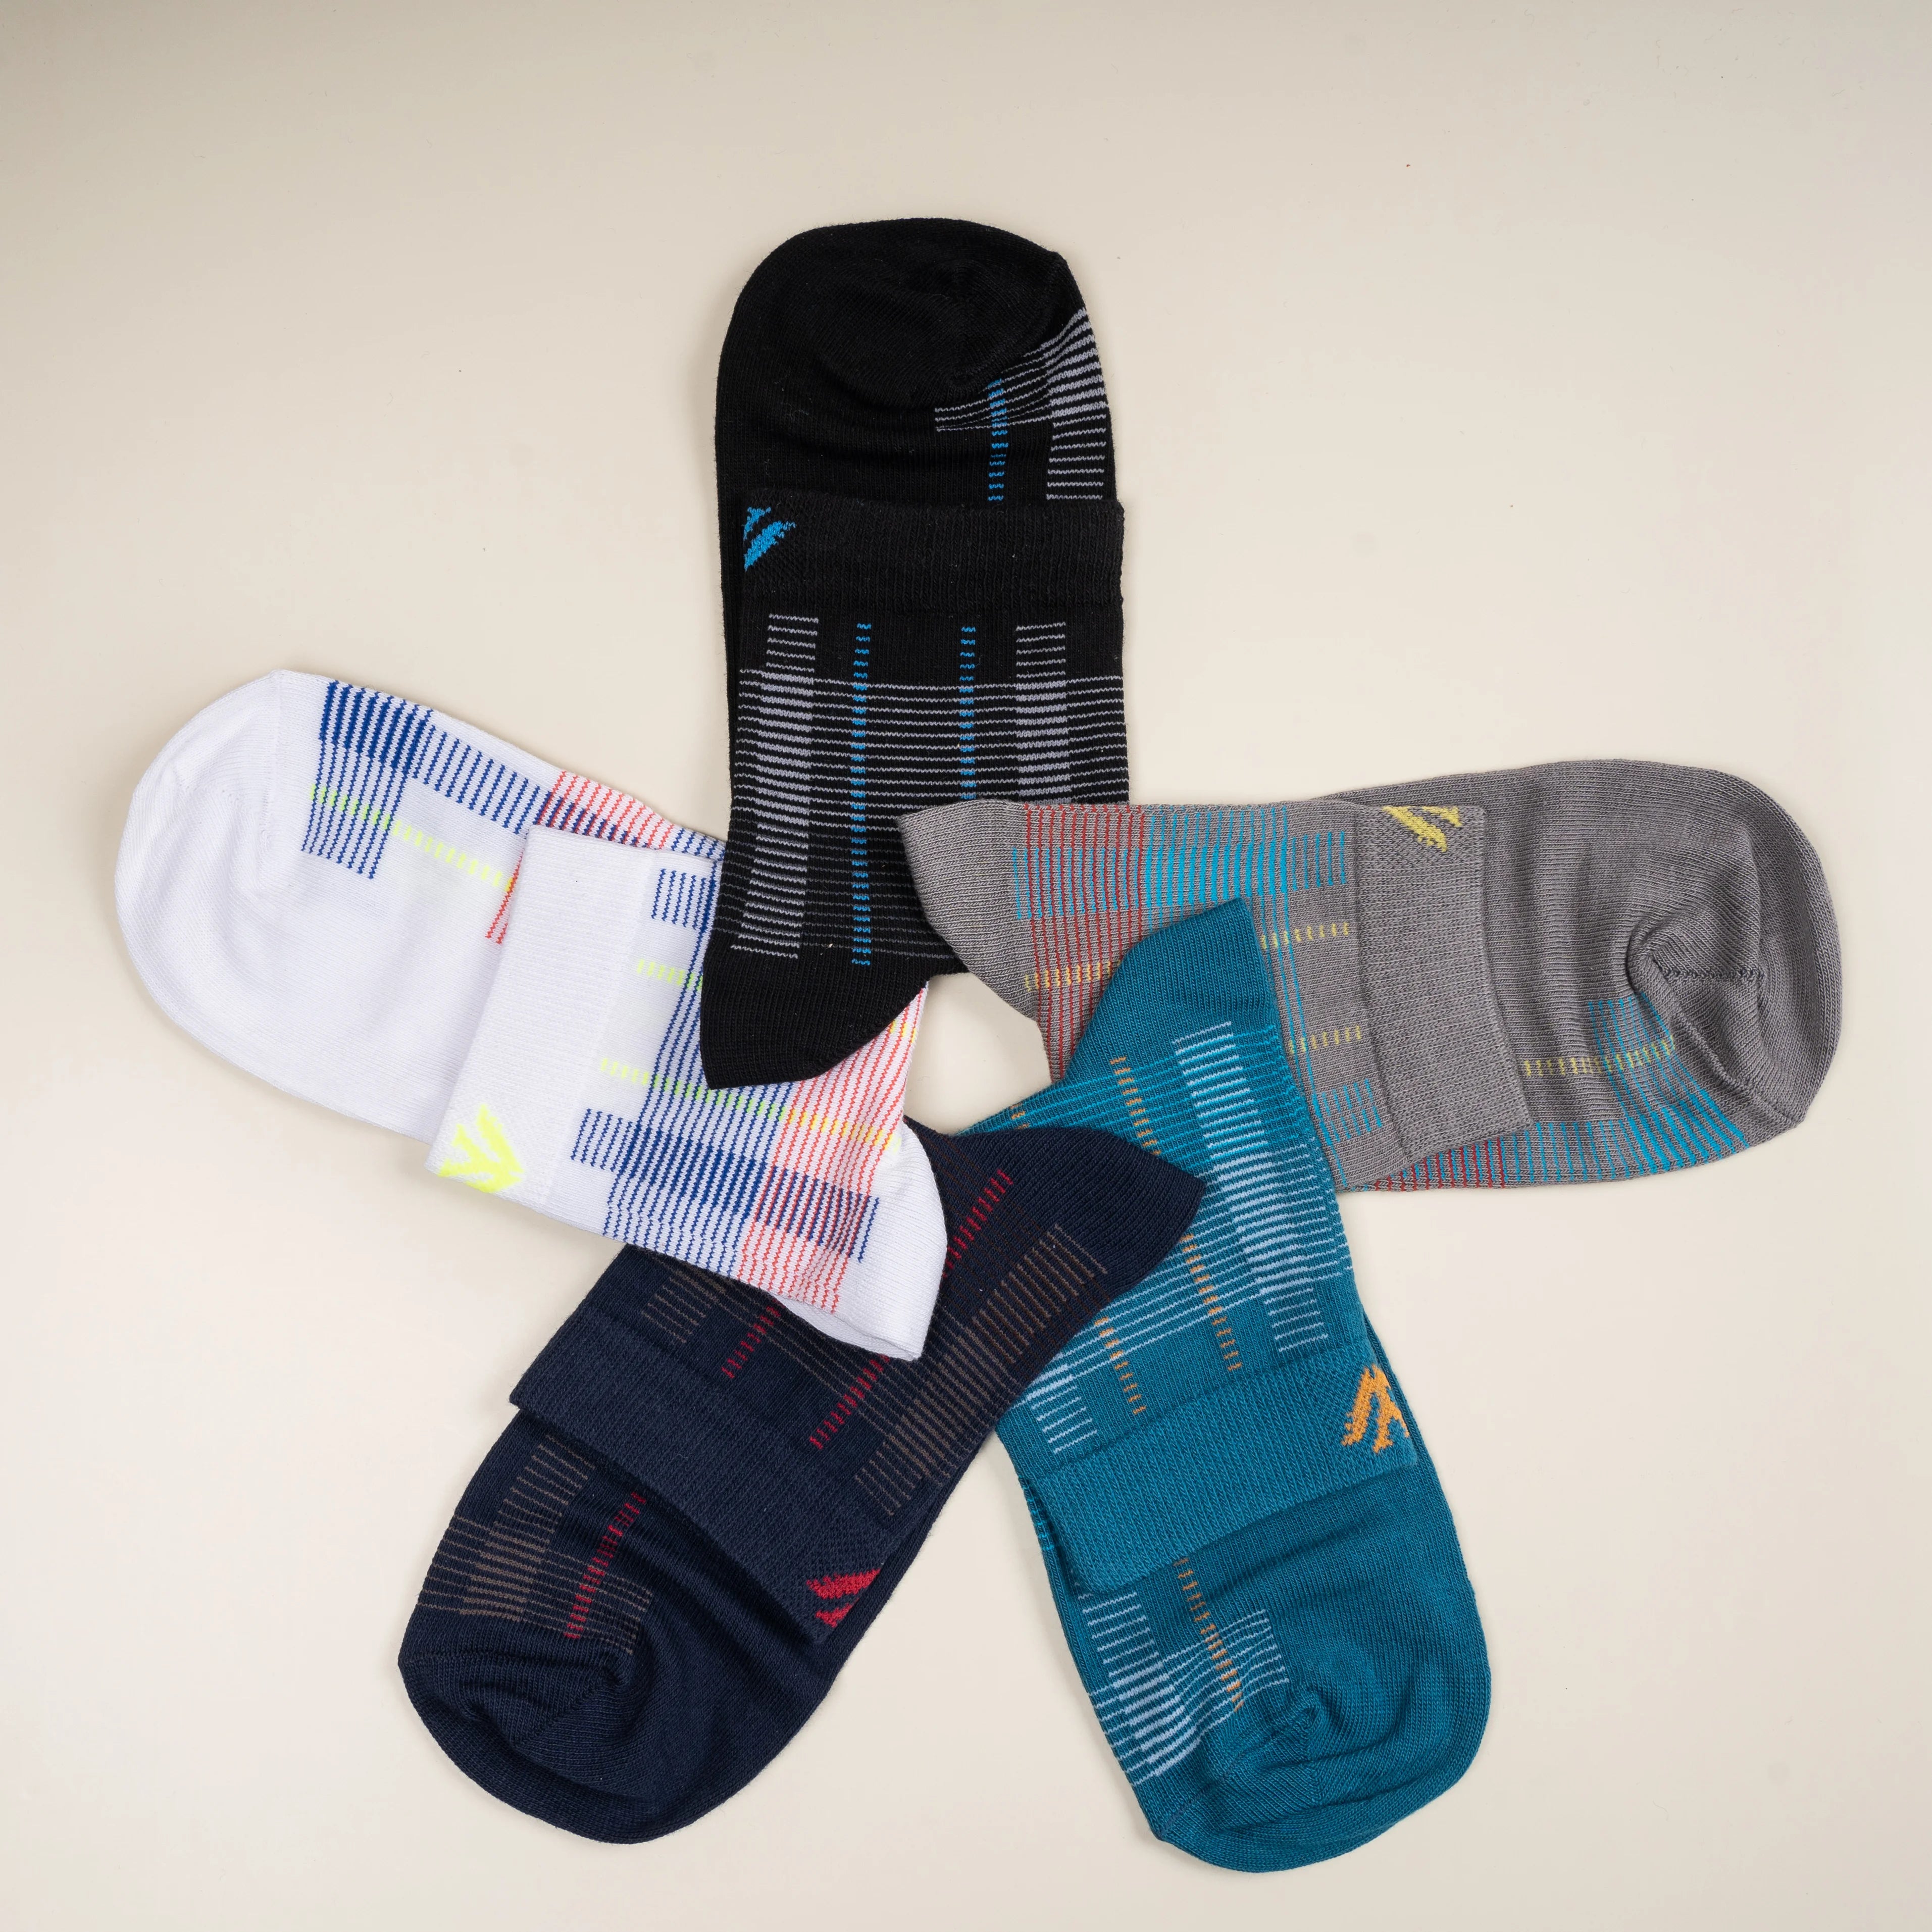 Young Wings Men's Multi Colour Cotton Fabric Design Ankle Length Socks - Pack of 5, Style no. M1-291 N